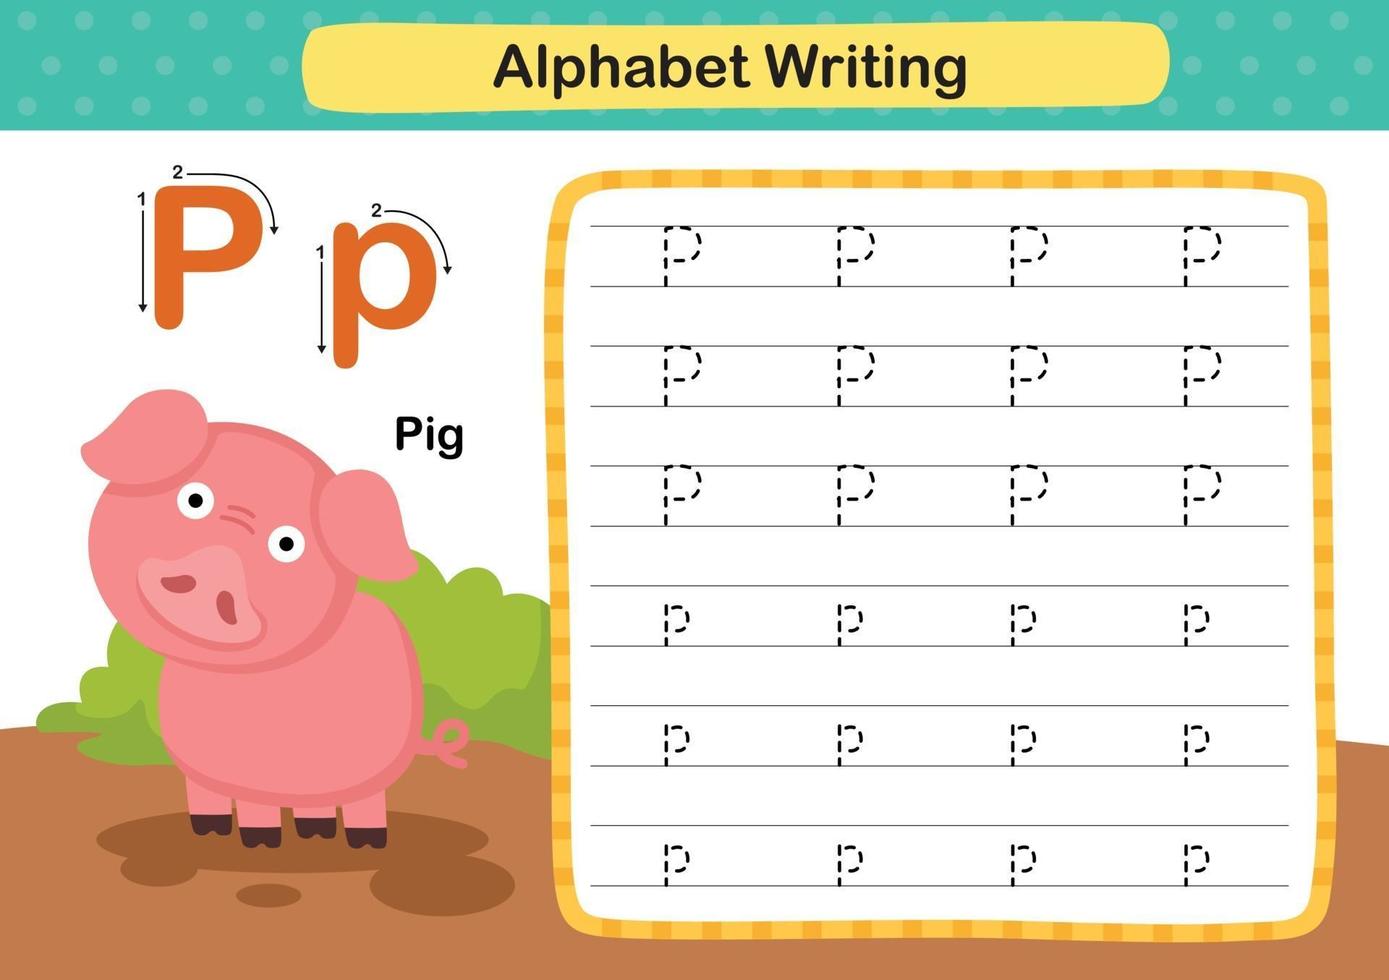 Alphabet Letter P-Pig exercise with cartoon vocabulary illustration, vector